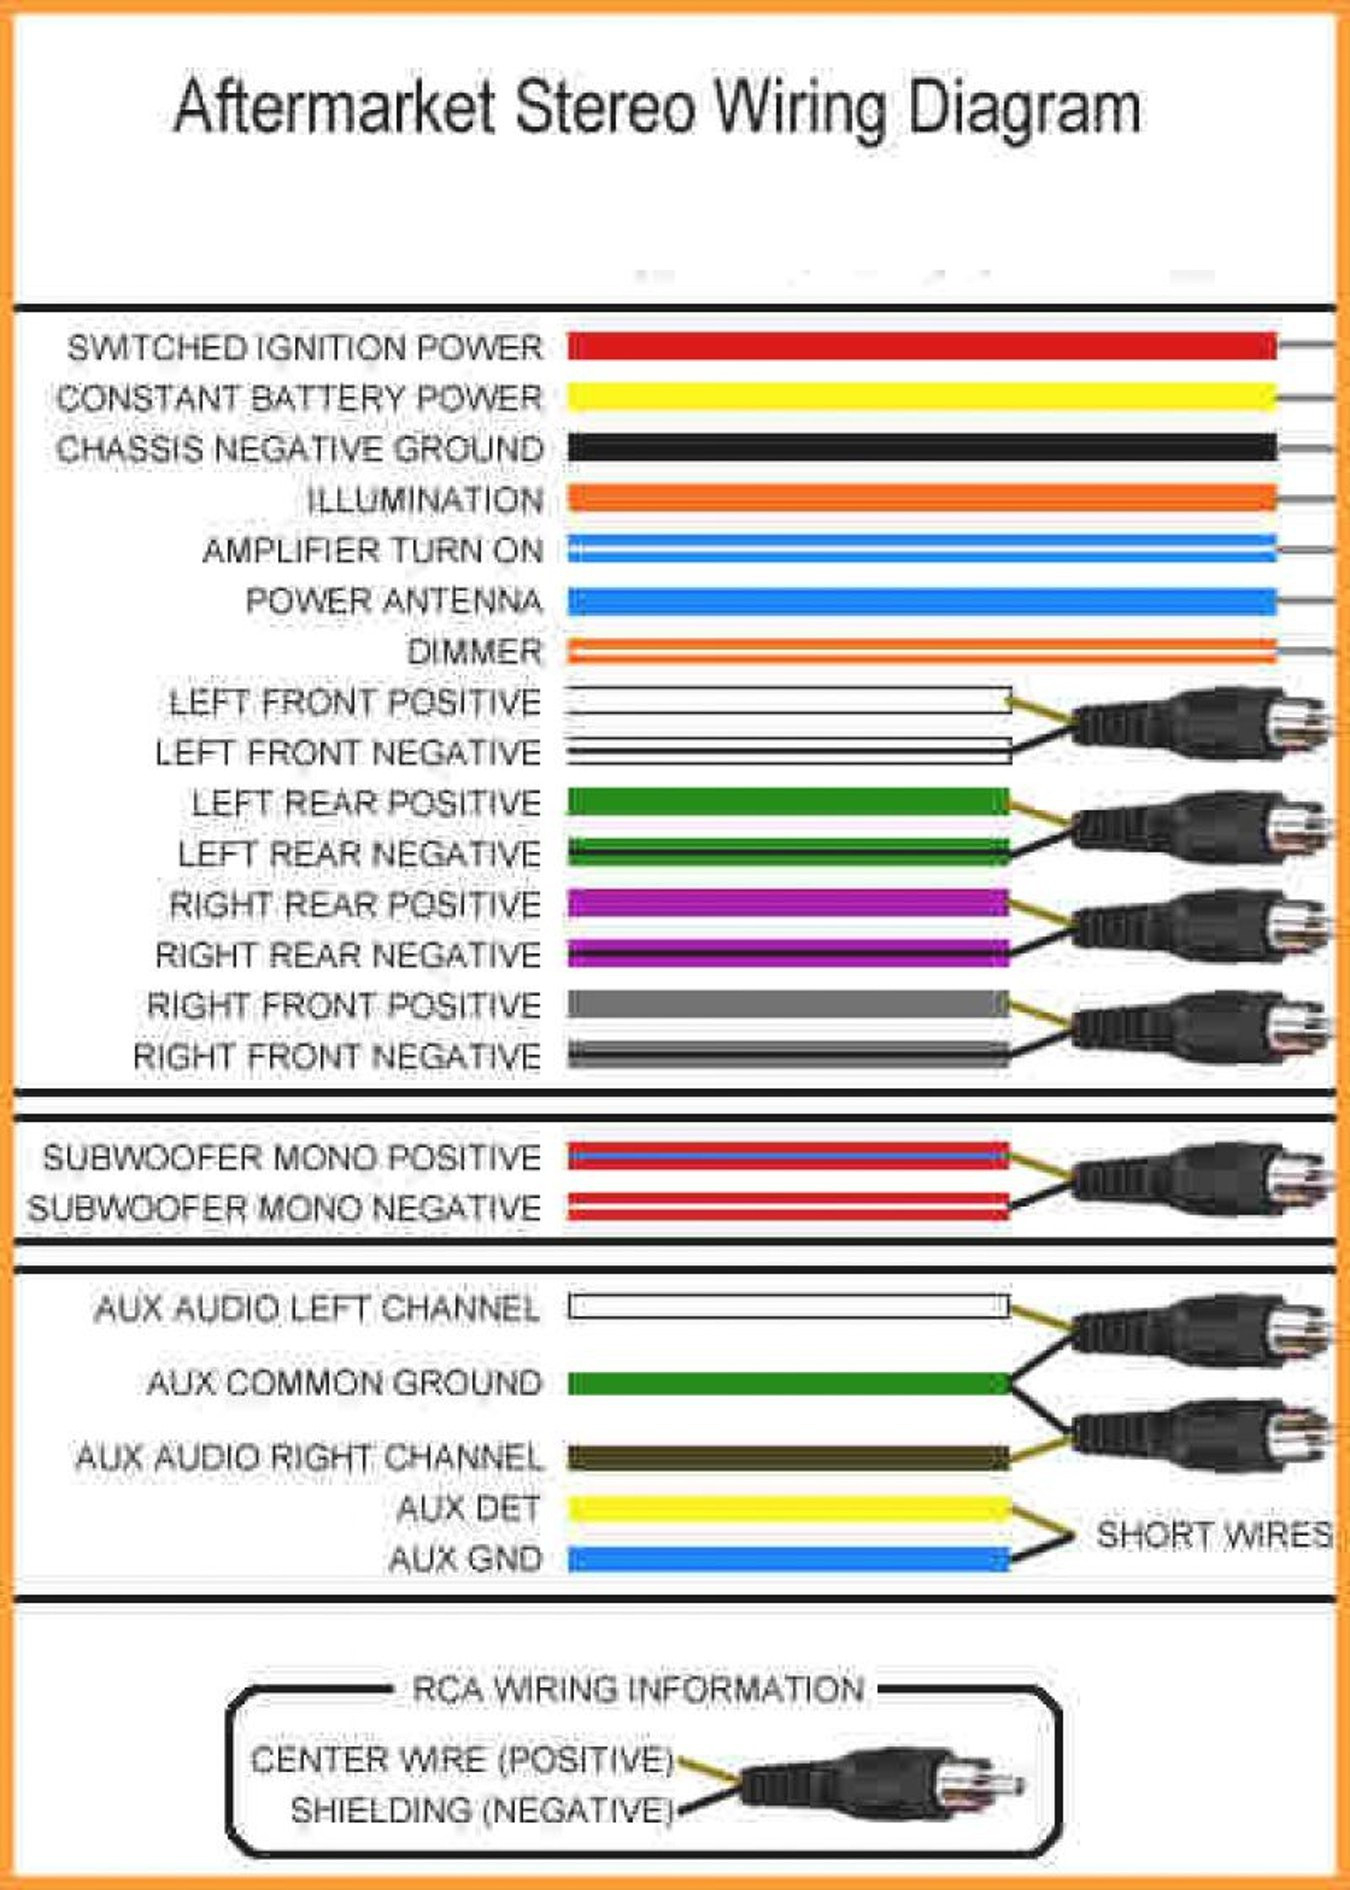 Sony Stereo Wiring Colors - Wiring Diagrams Click - Pioneer Radio Wiring Diagram Colors